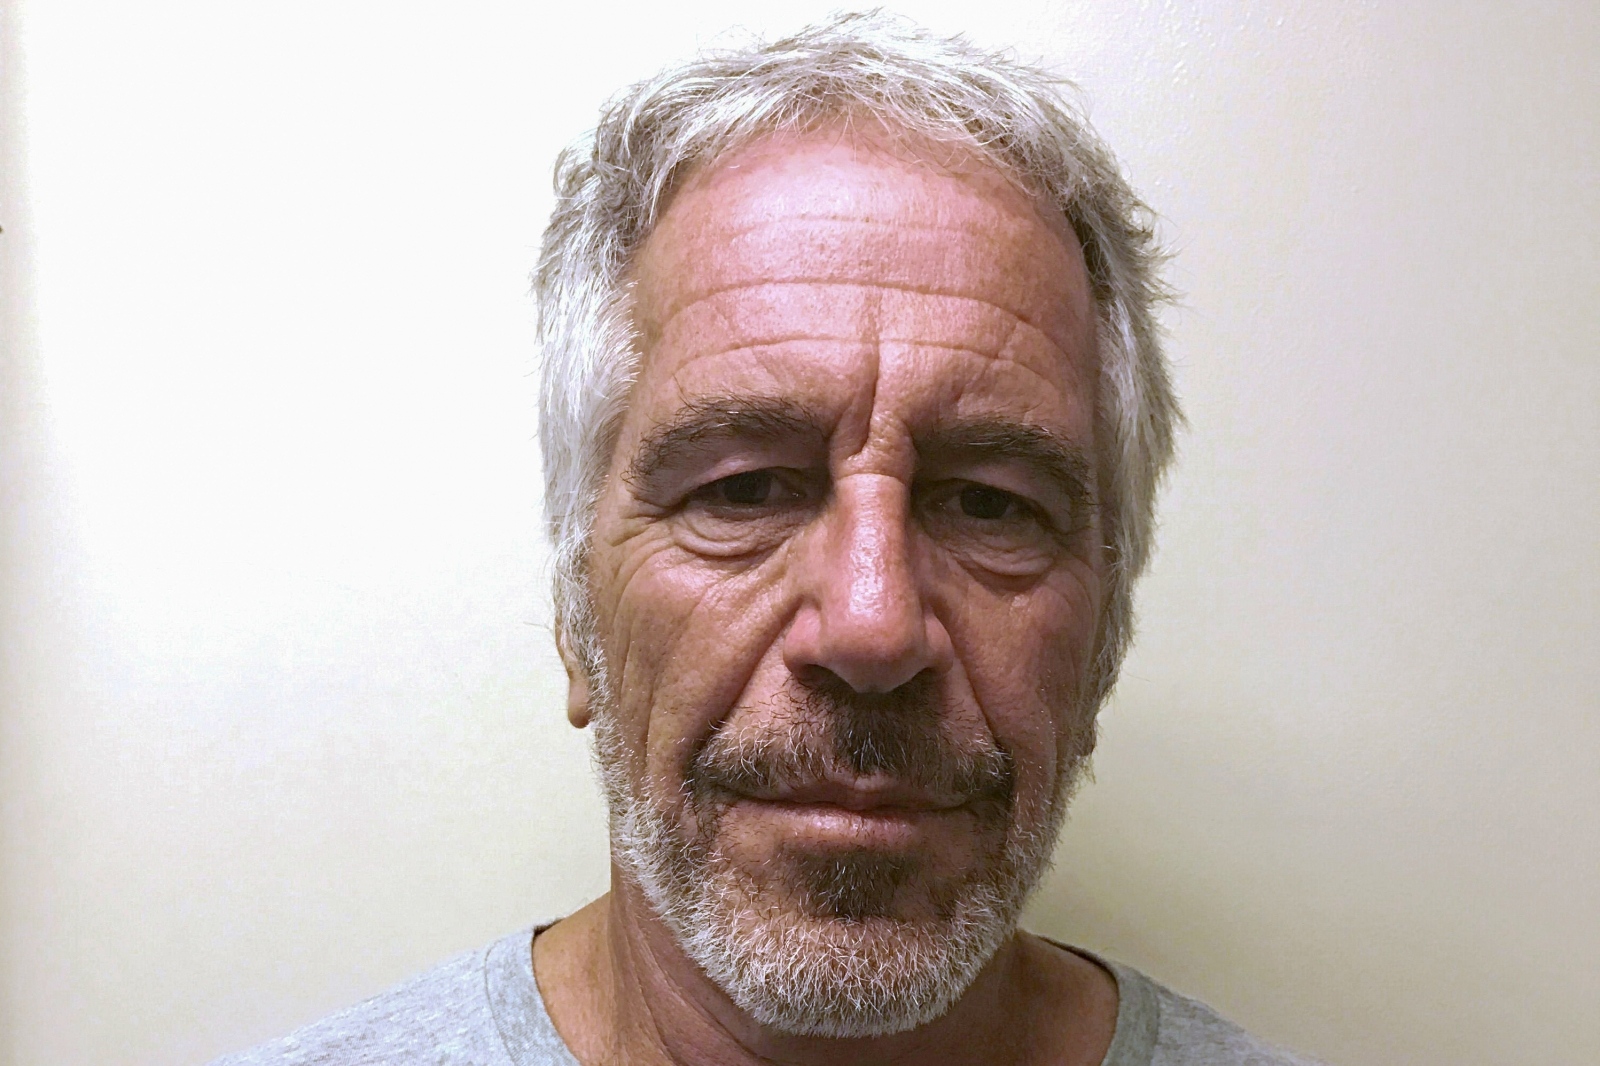 FILE PHOTO: Jeffrey Epstein appears in a photo taken for the NY Division of Criminal Justice Services' sex offender registry FILE PHOTO: U.S. financier Jeffrey Epstein appears in a photograph taken for the New York State Division of Criminal Justice Services' sex offender registry March 28, 2017 and obtained by Reuters July 10, 2019.  New York State Division of Criminal Justice Services/Handout/File Photo via REUTERS. THIS IMAGE HAS BEEN SUPPLIED BY A THIRD PARTY. THIS IMAGE WAS PROCESSED BY REUTERS TO ENHANCE QUALITY, AN UNPROCESSED VERSION HAS BEEN PROVIDED SEPARATELY. Handout .